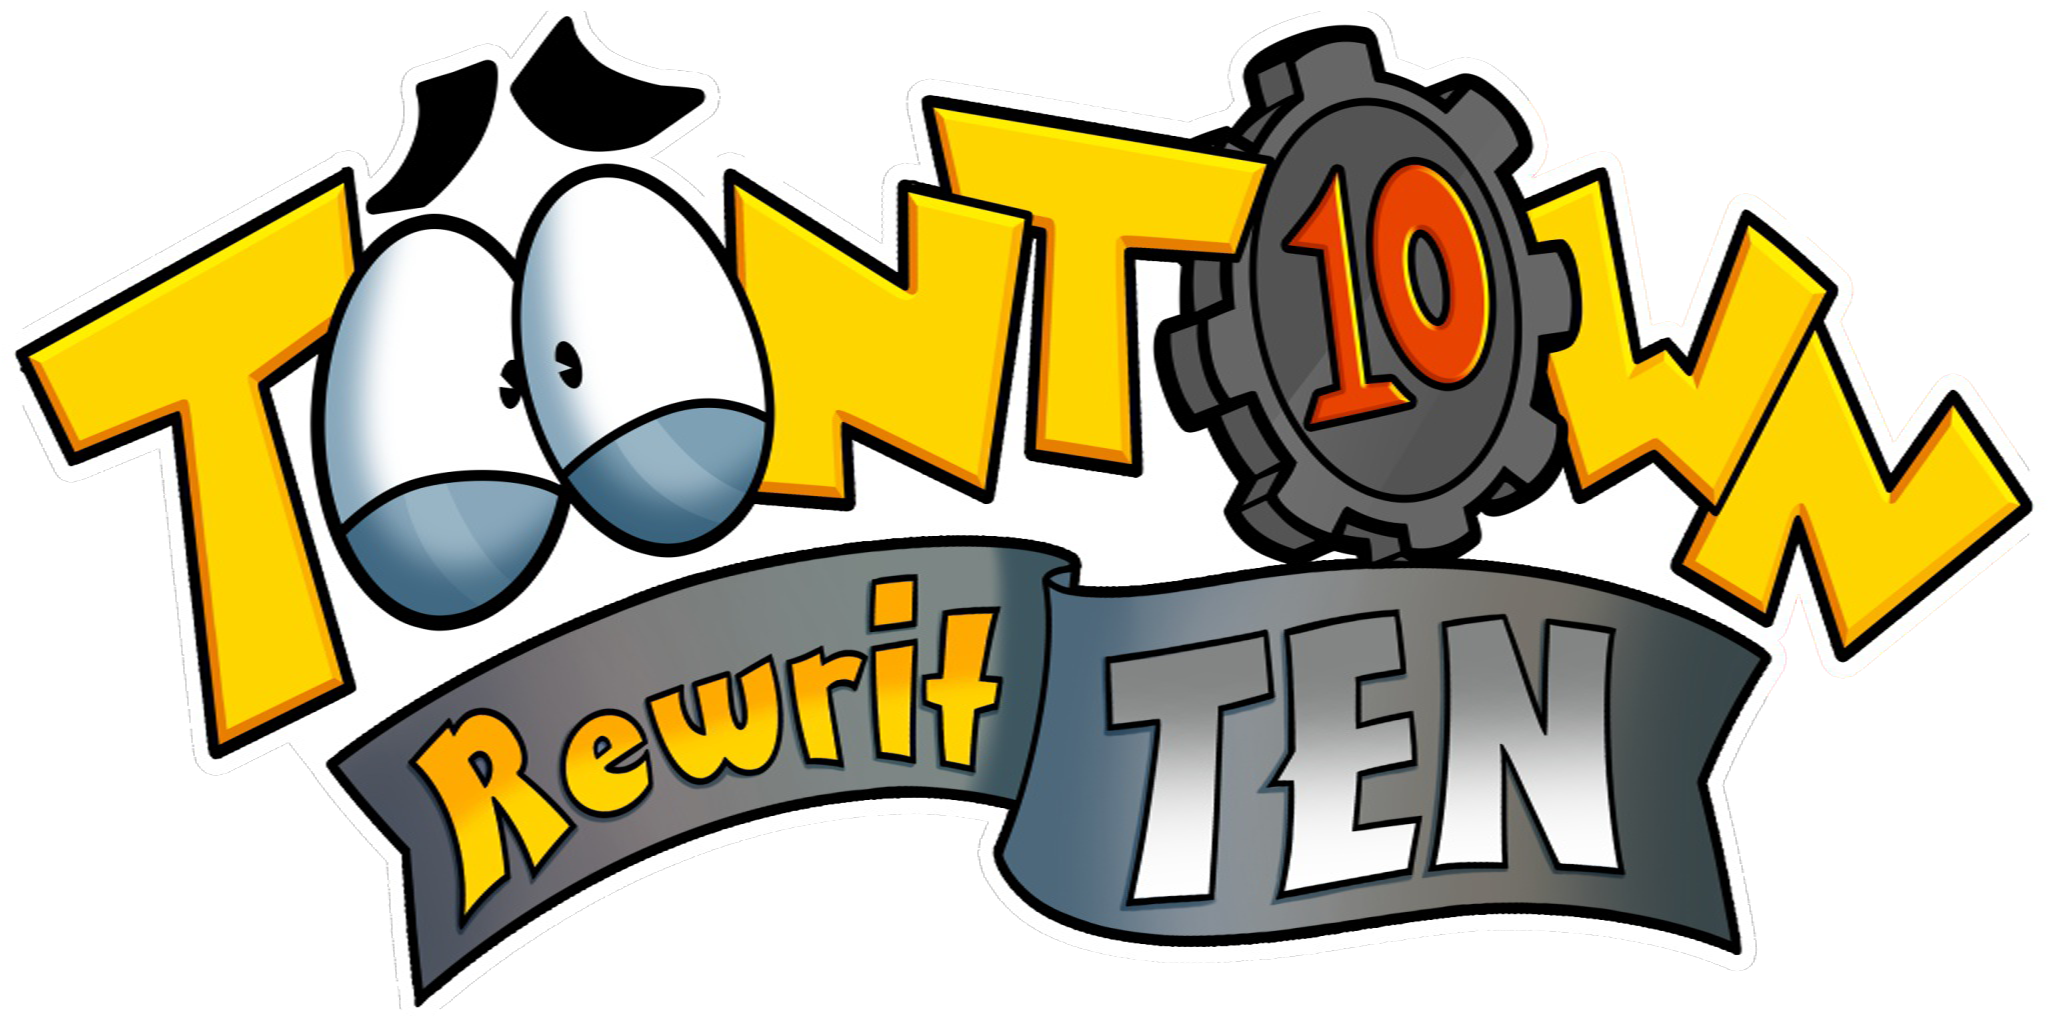 The 10th-anniversary logo of Toontown Rewritten for Under New Management.